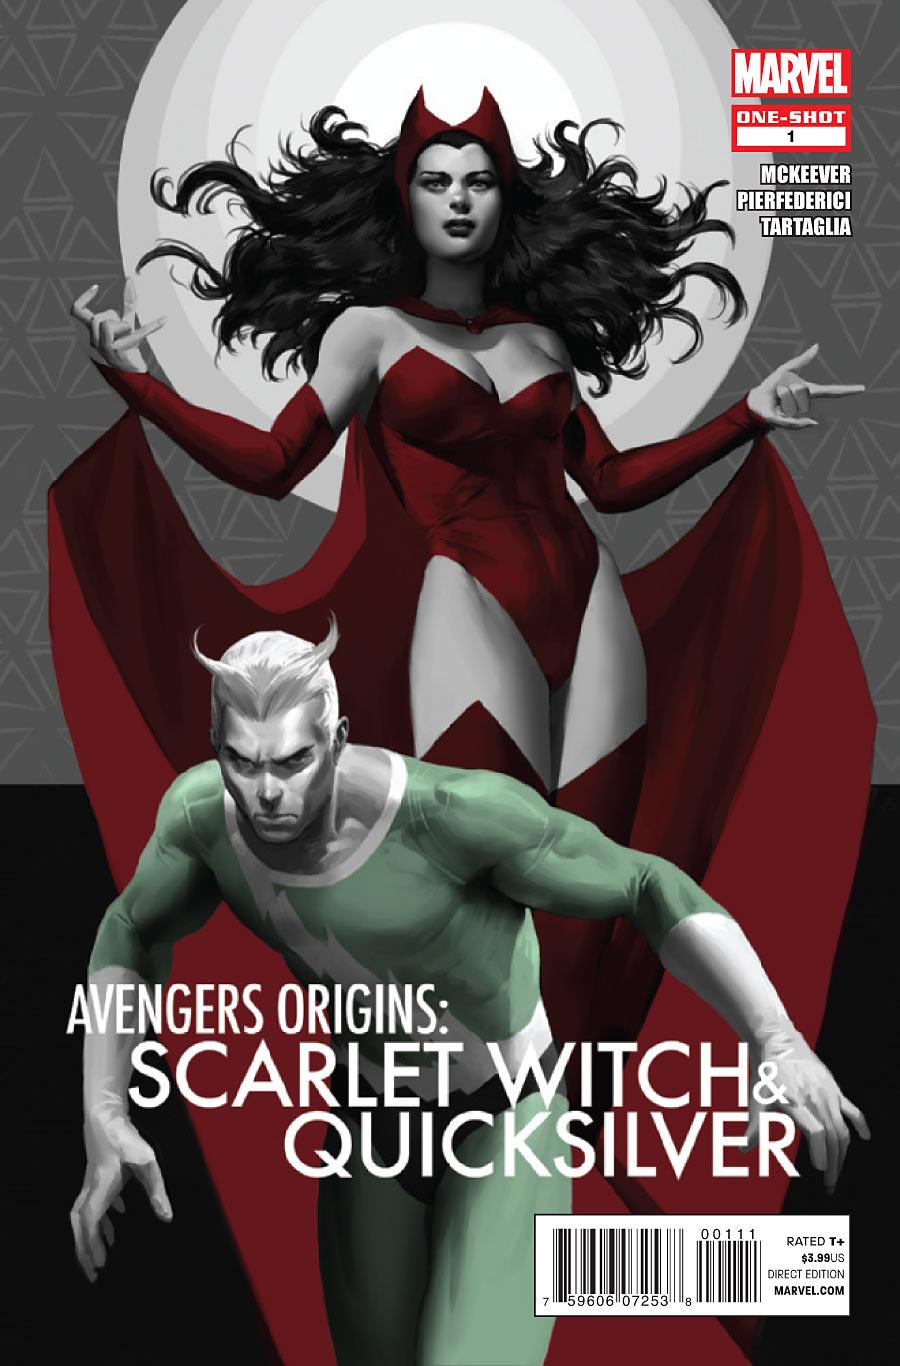 Avengers Origins: The Scarlet Witch & Quicksilver Vol. 1 #1